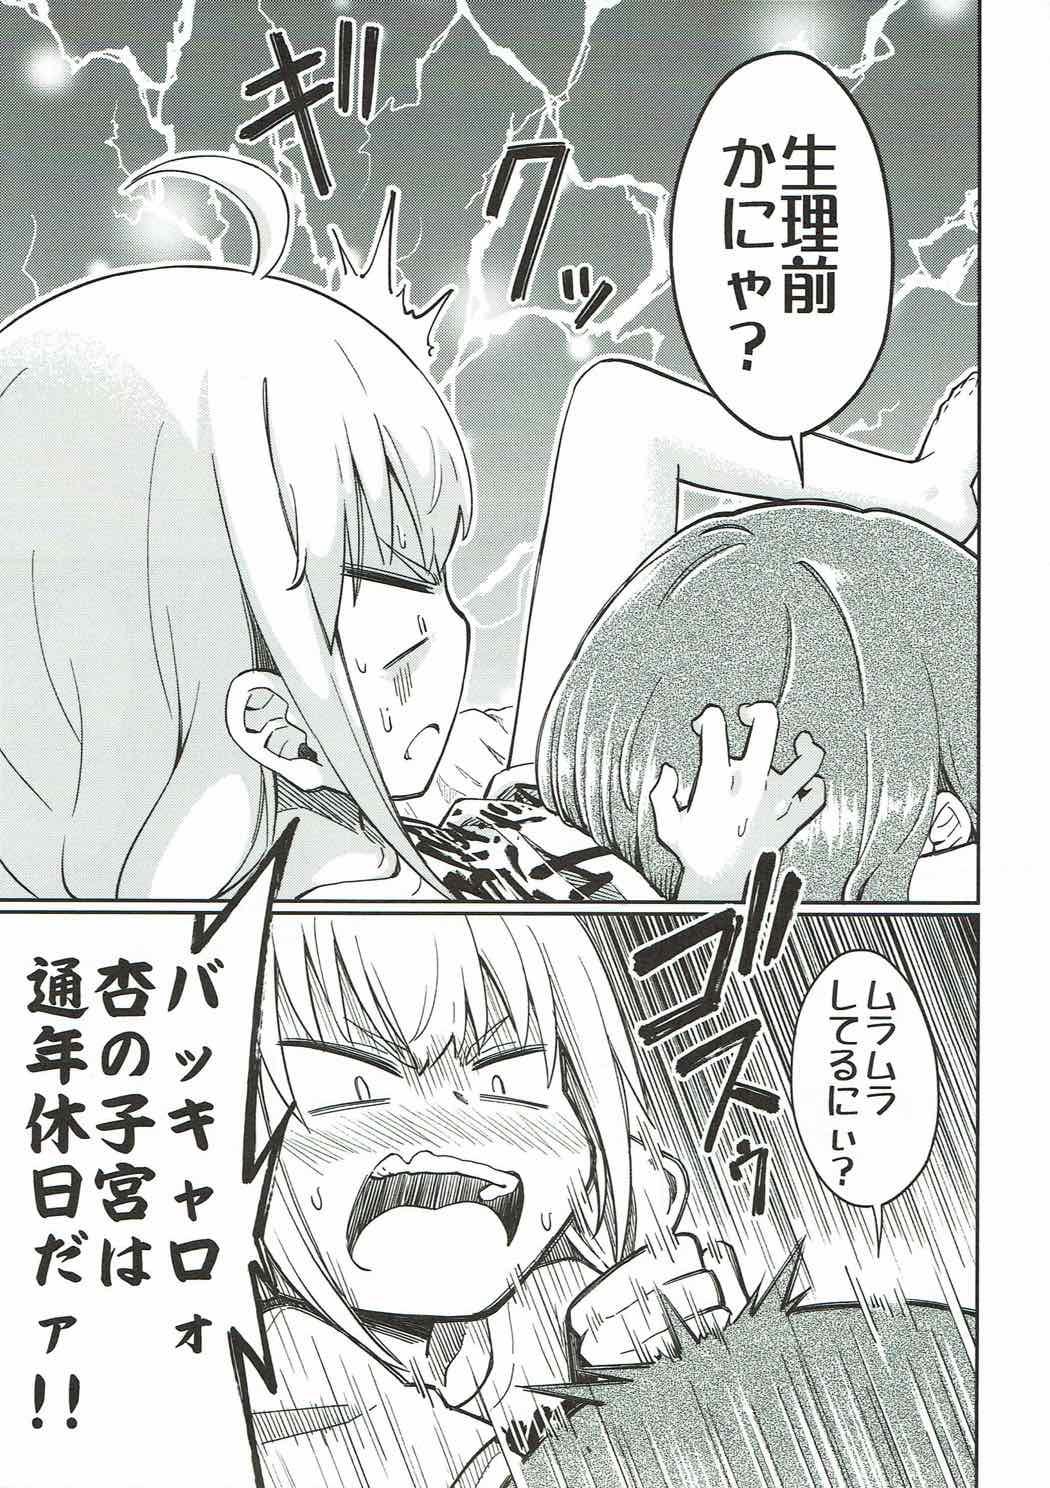 Ikillitts Lovely Girls' Lily Vol. 16 - The idolmaster Funny - Page 10